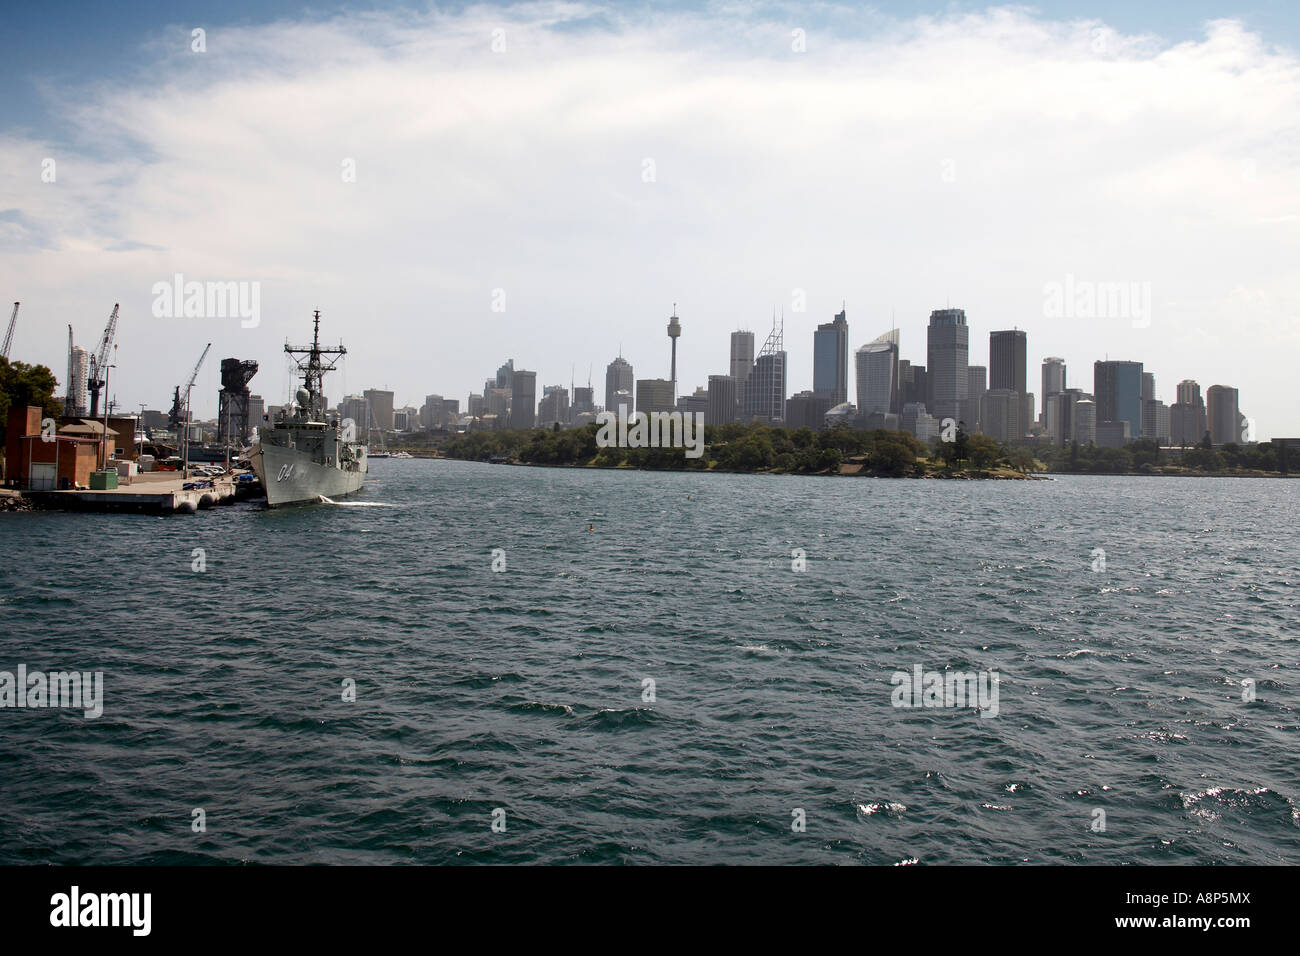 Garden Island RAN Naval base with warship and City Centre skyline buildings in Sydney New South Wales NSW Australia Stock Photo